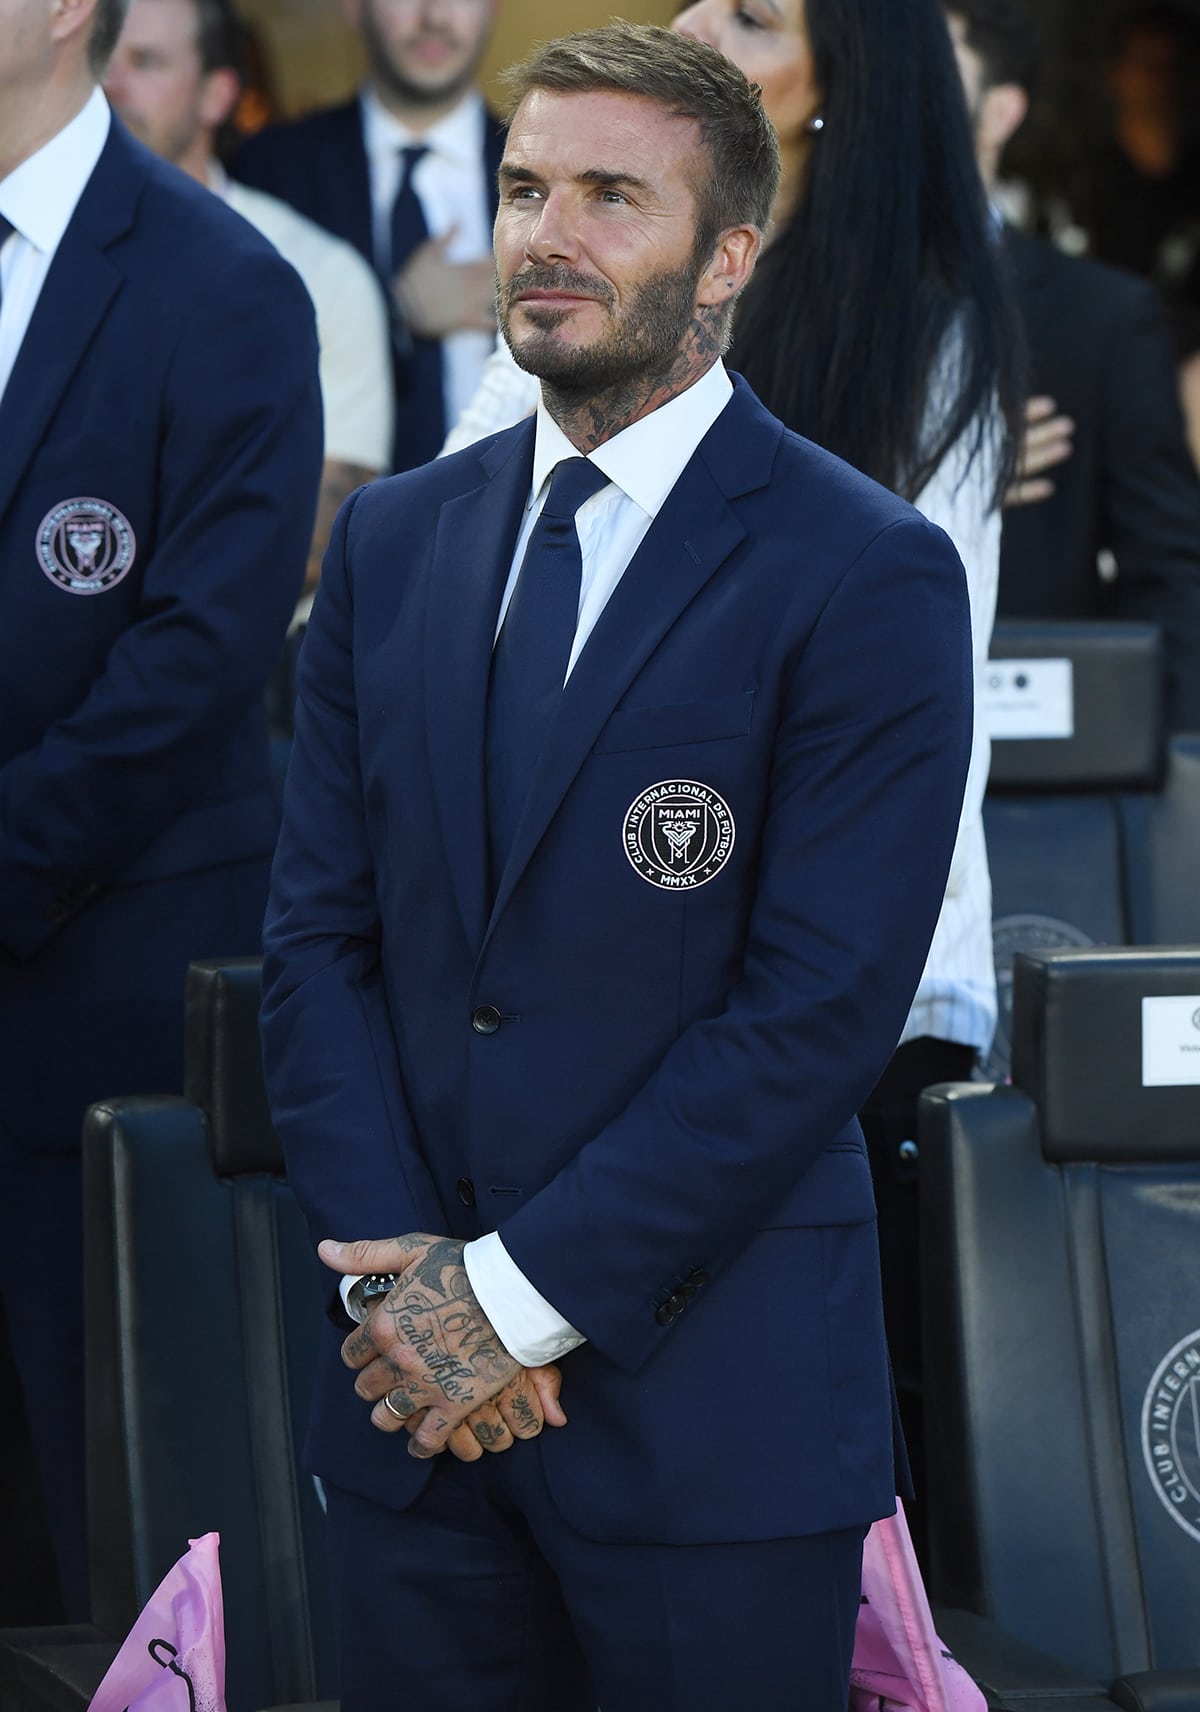 David Beckham is thrilled to have Lionel Messi in his Inter Miami soccer club